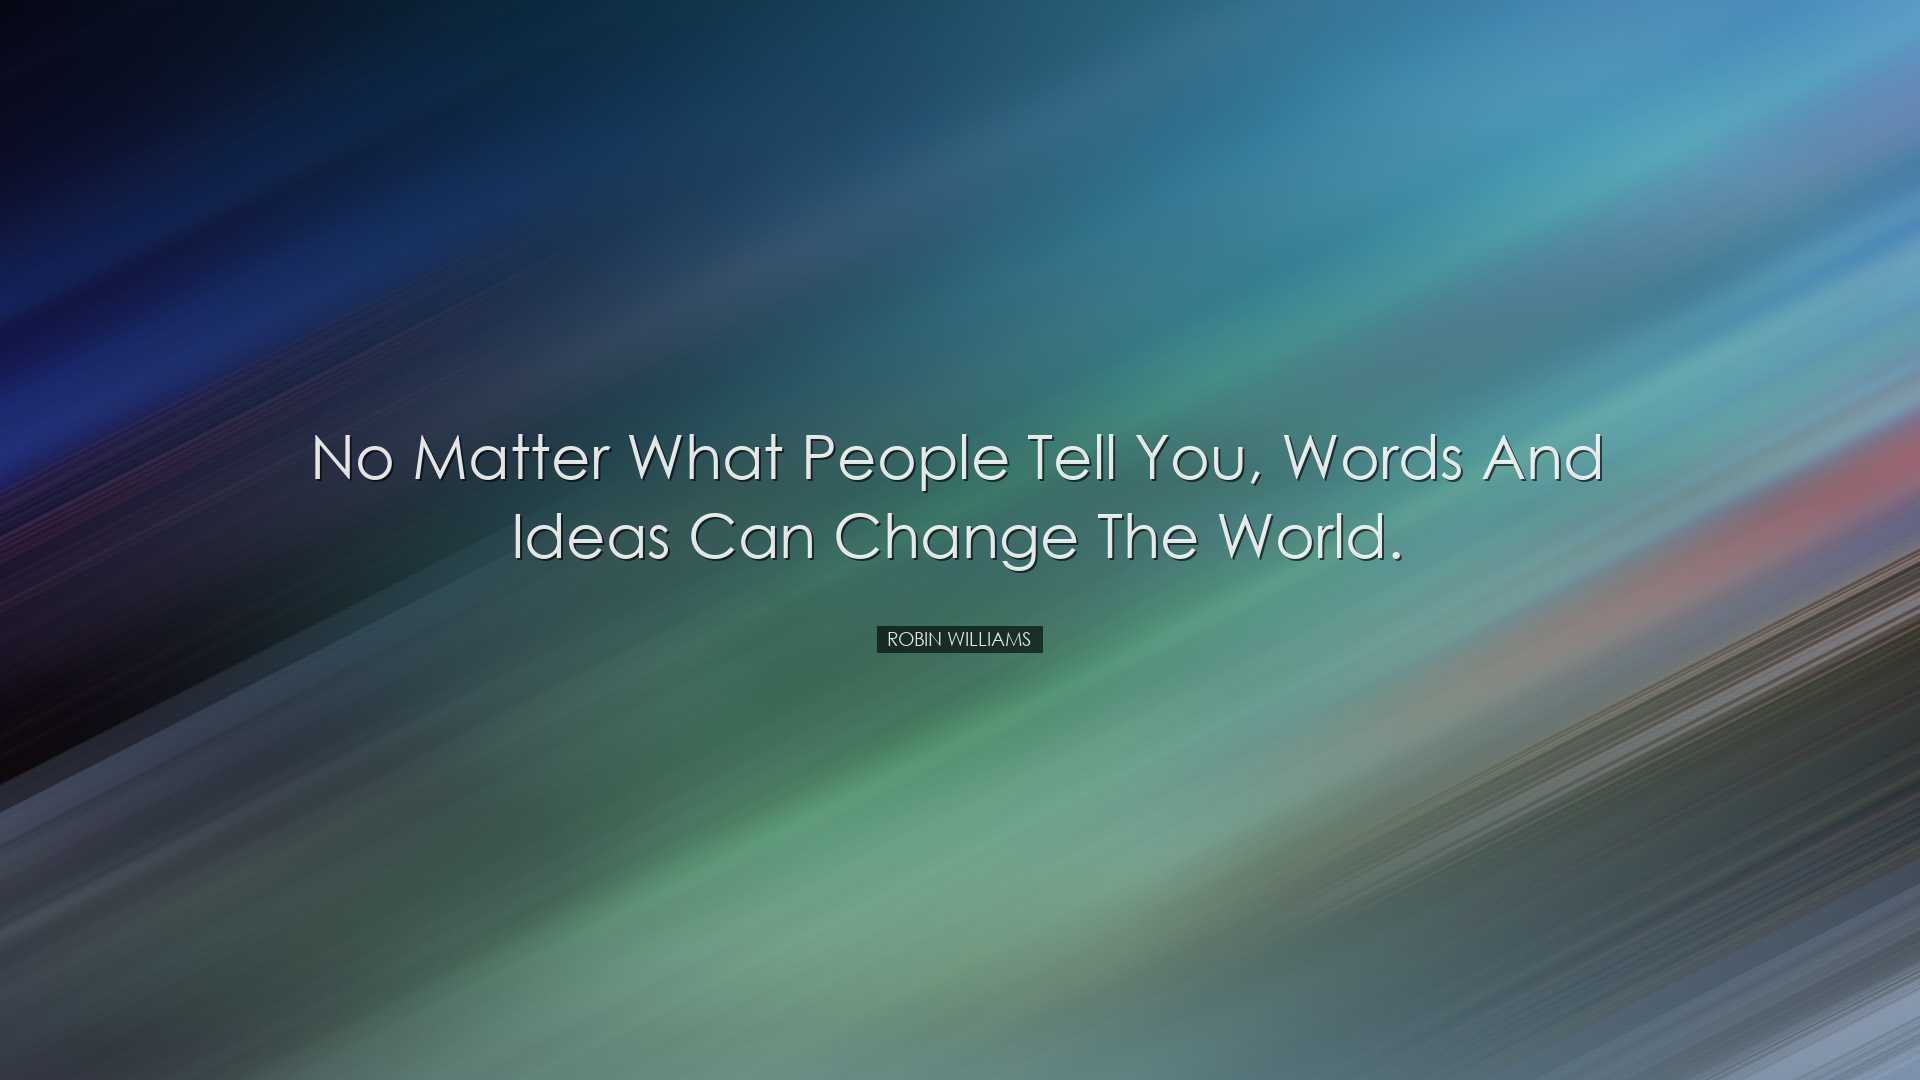 No matter what people tell you, words and ideas can change the wor